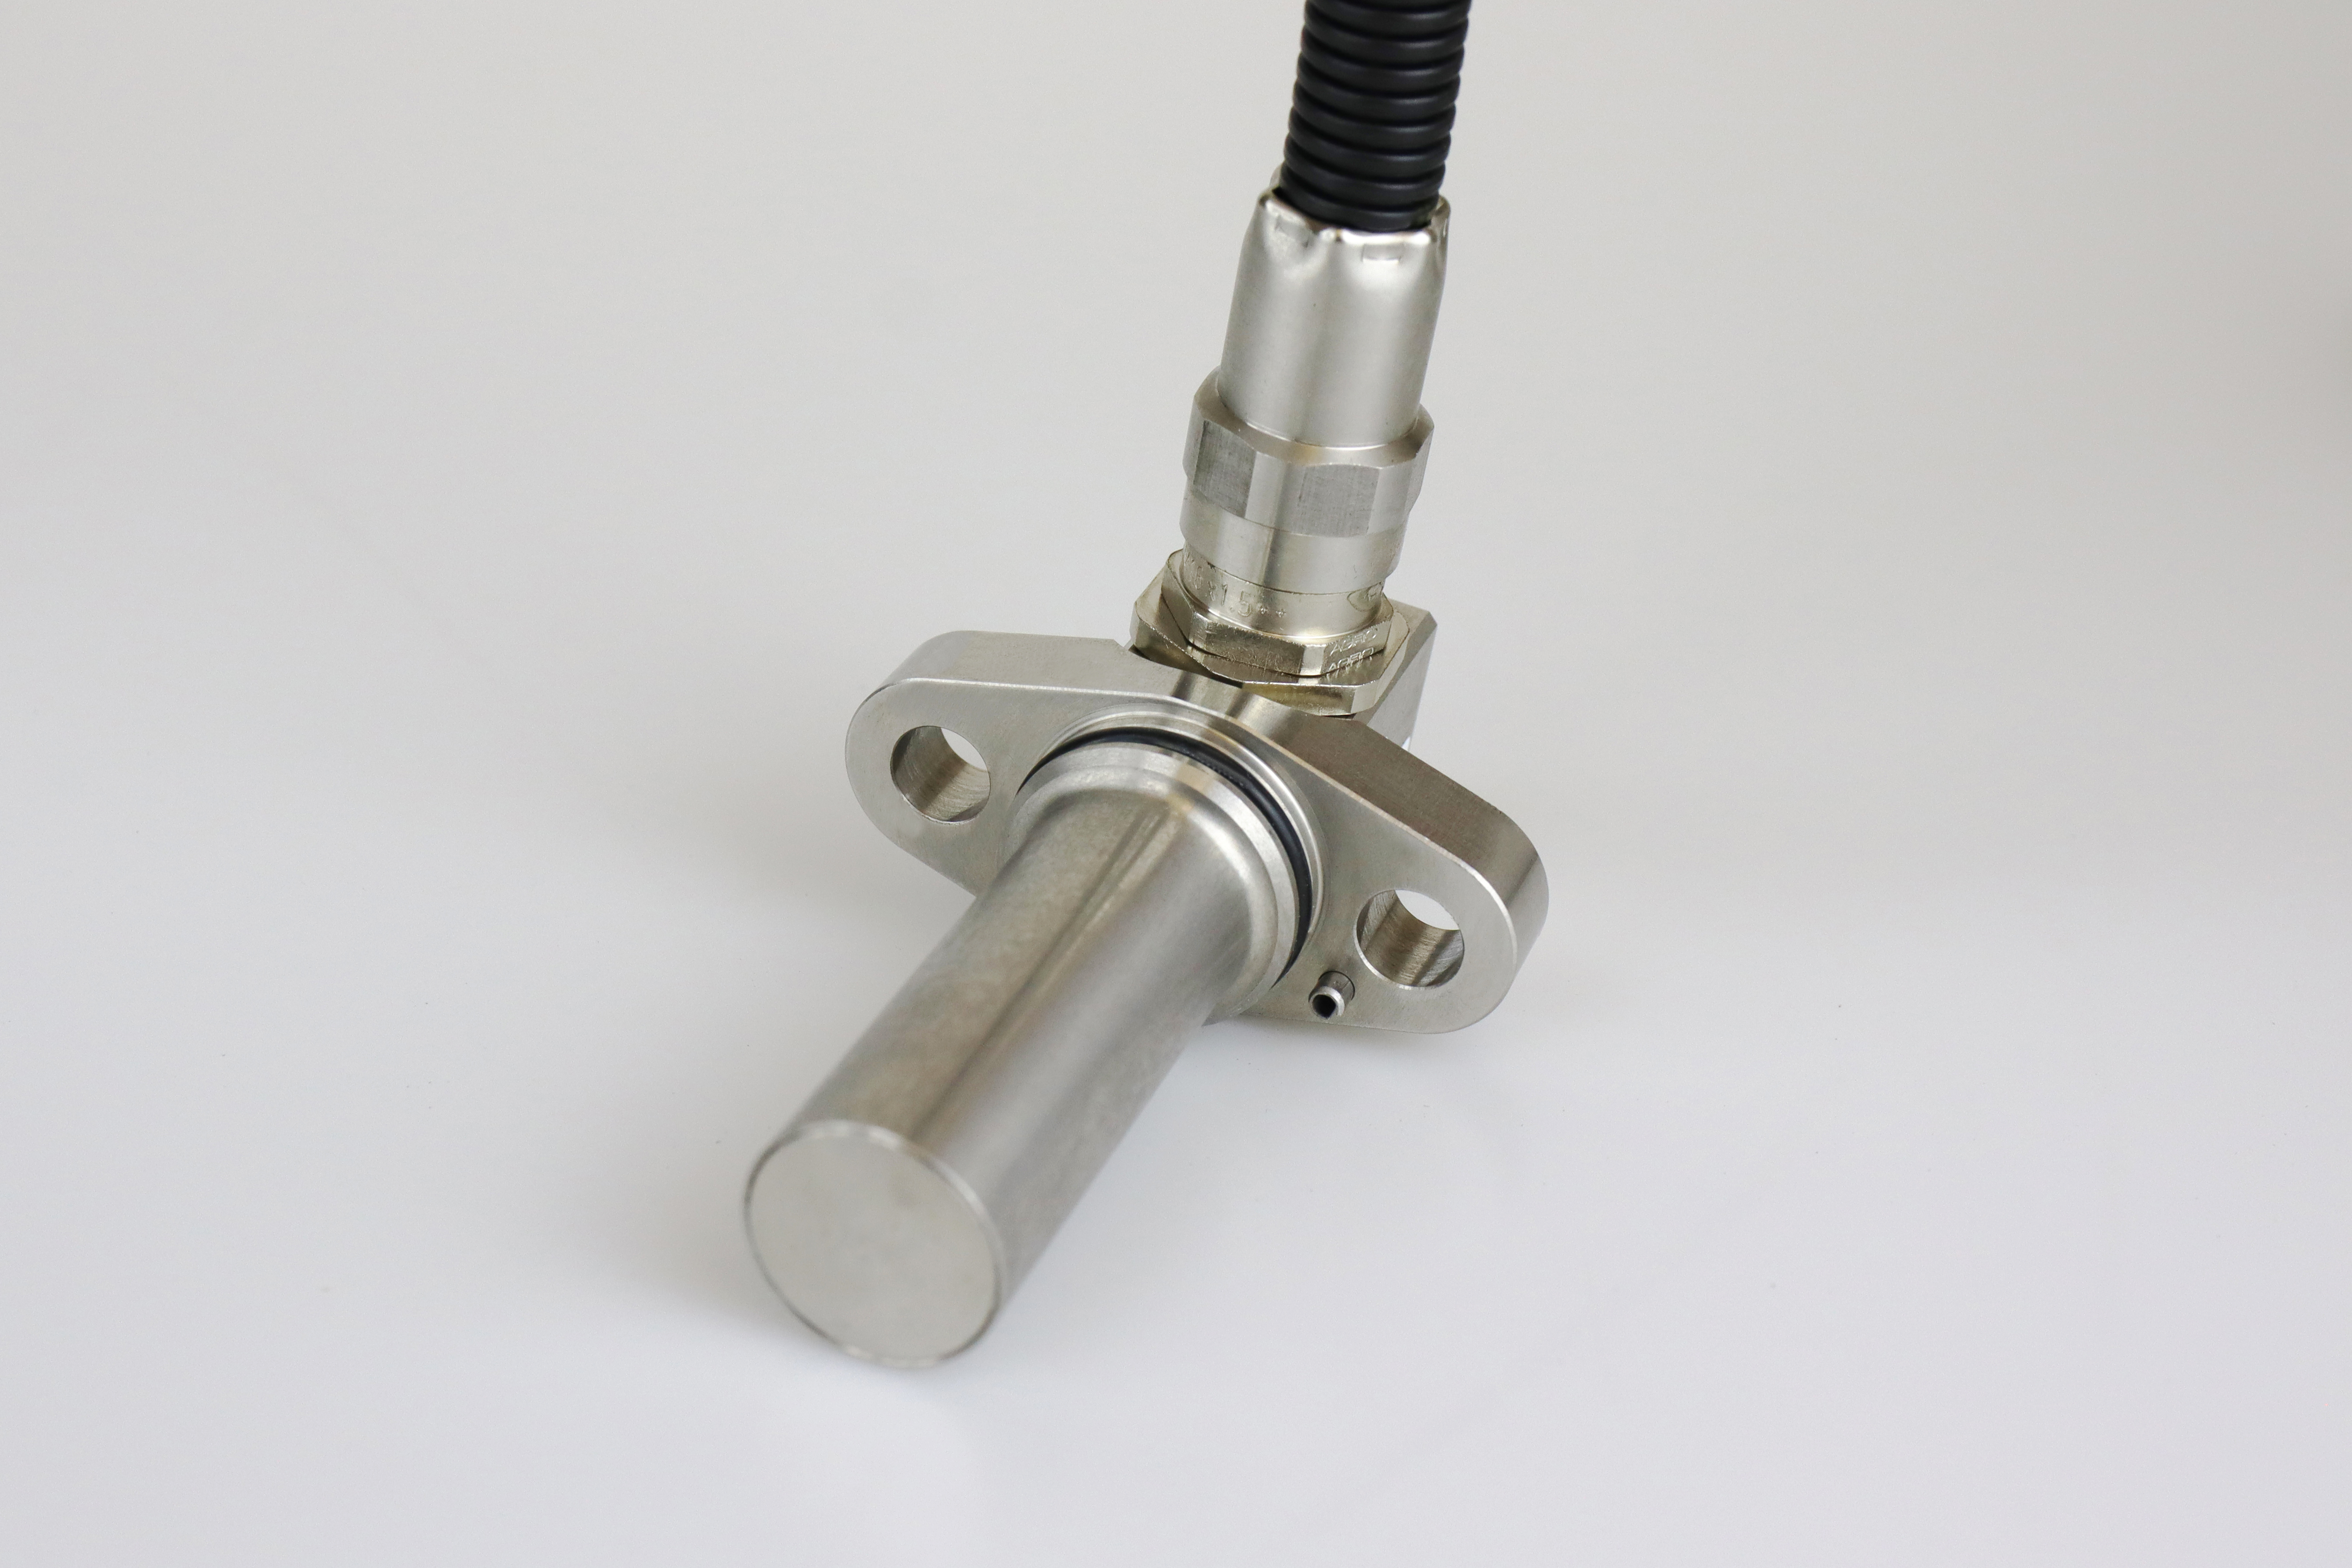 The image shows a Stainless steel flange speed sensor type FA52 laying on a grey background